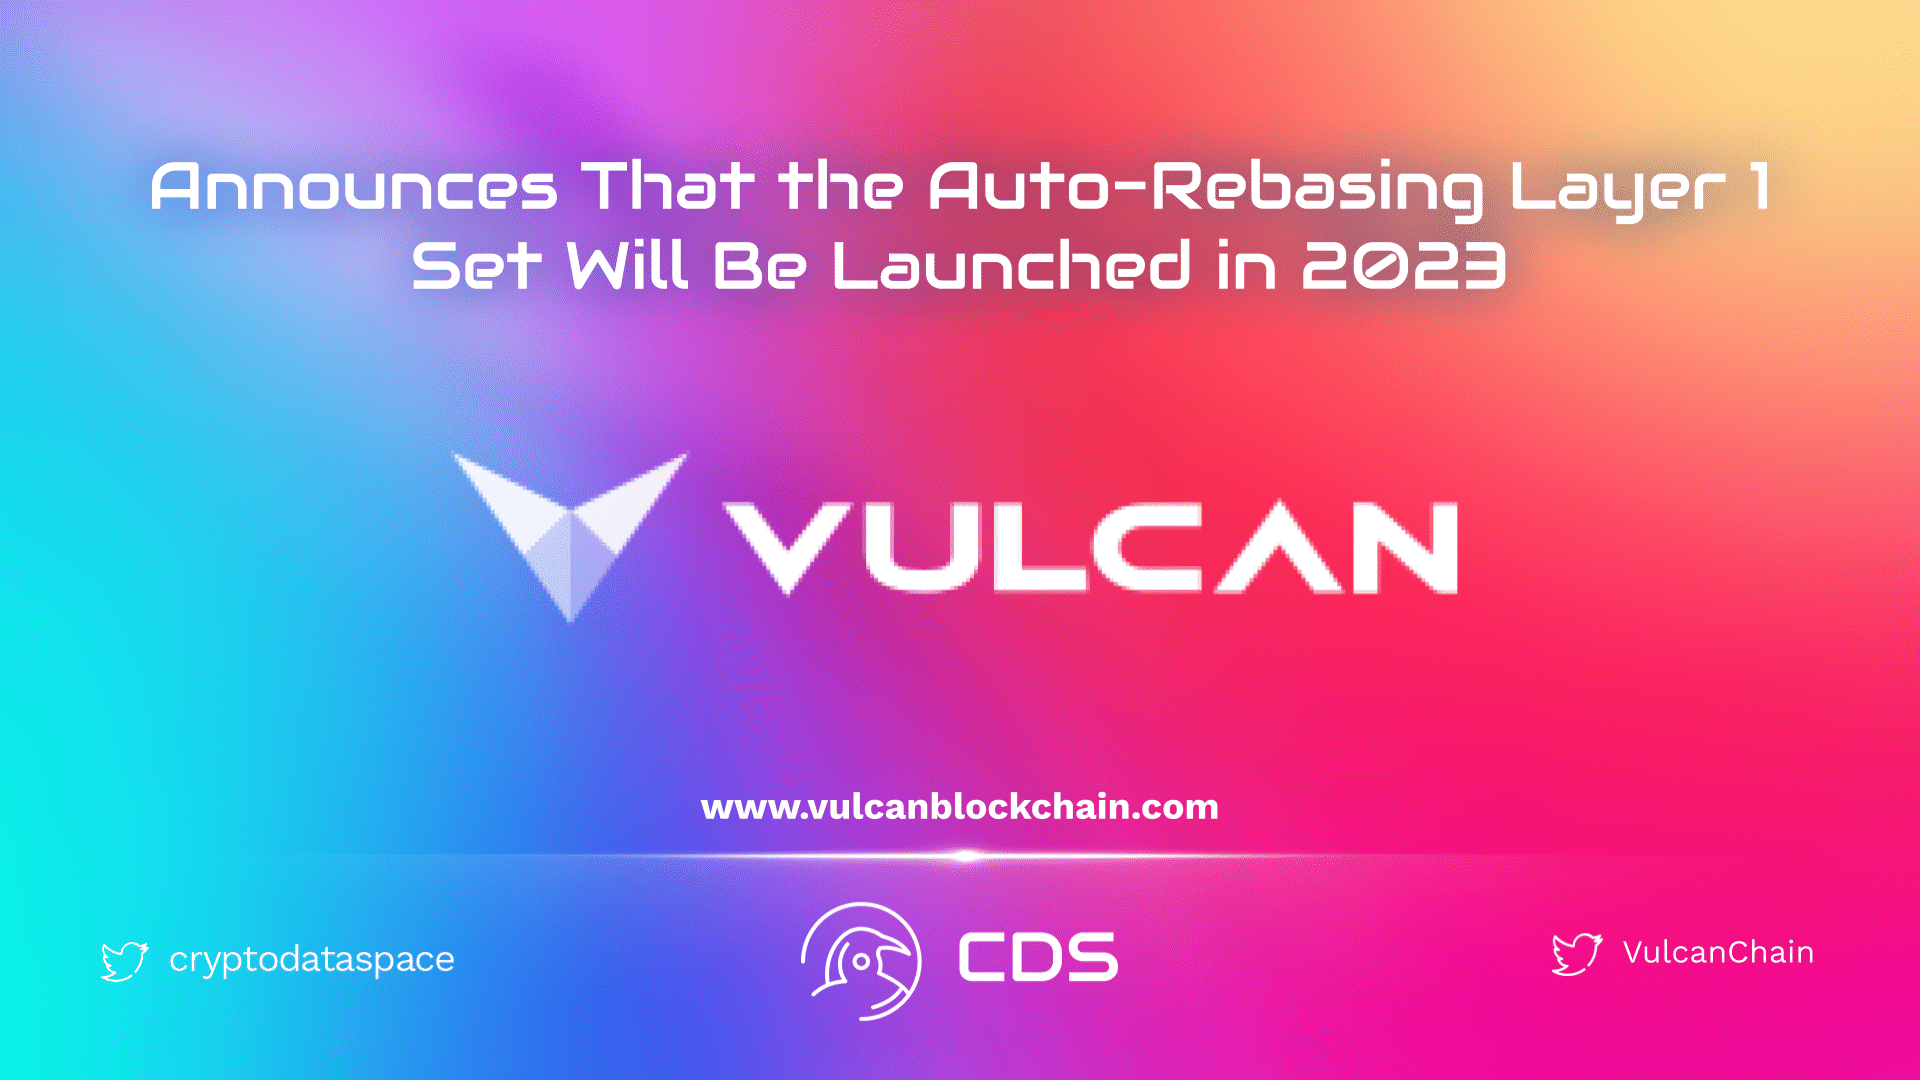 Vulcan Blockchain Announces That the Auto-Rebasing Layer 1 Set Will Be Launched in 2023